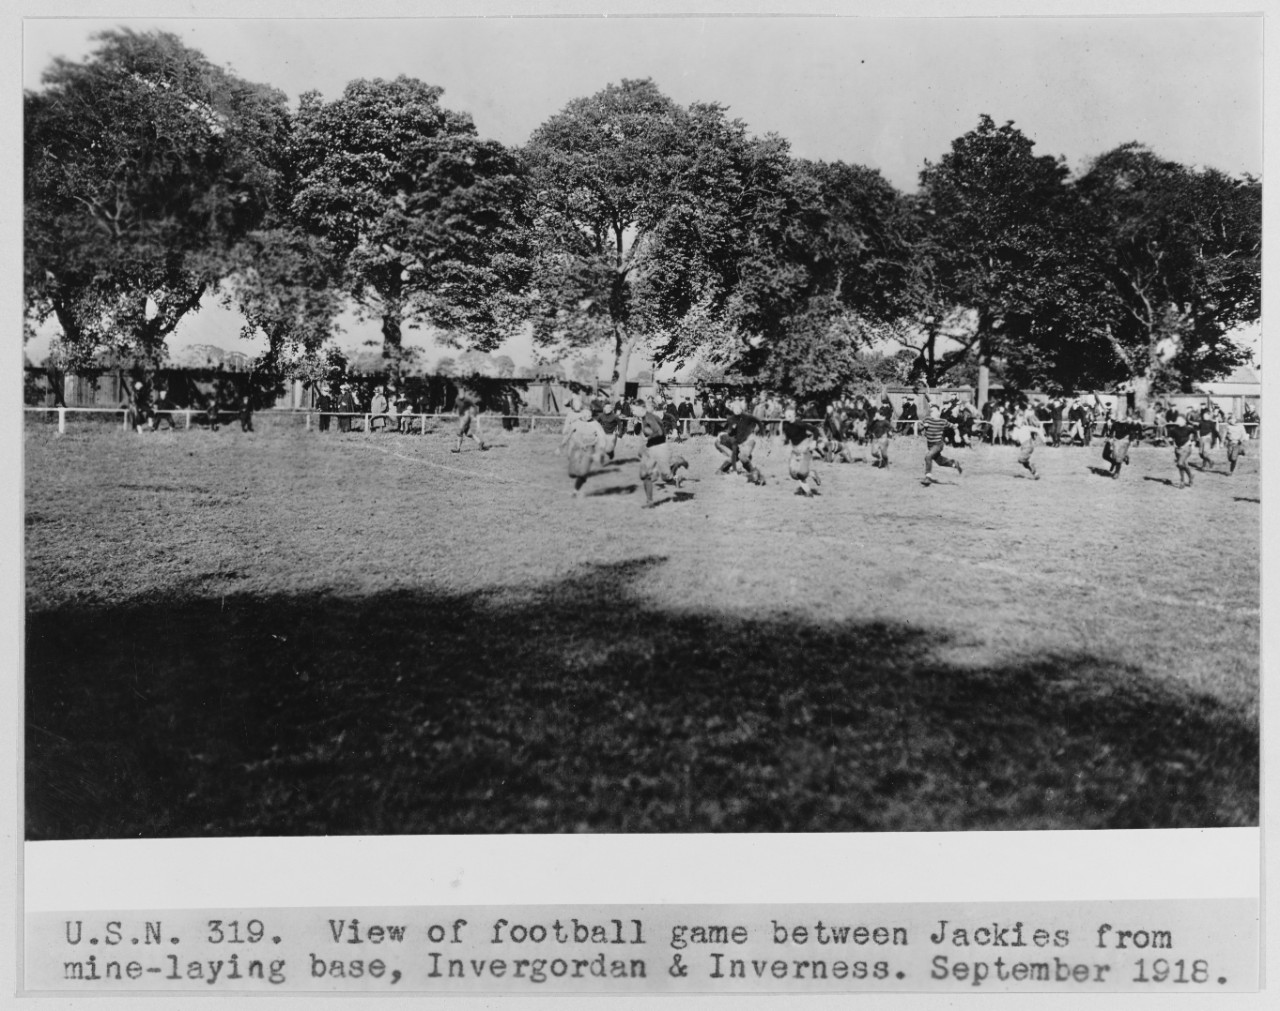 U.S.N. 319 View of football game between Jackies and from mine laying base, Invergordan and Inverness.